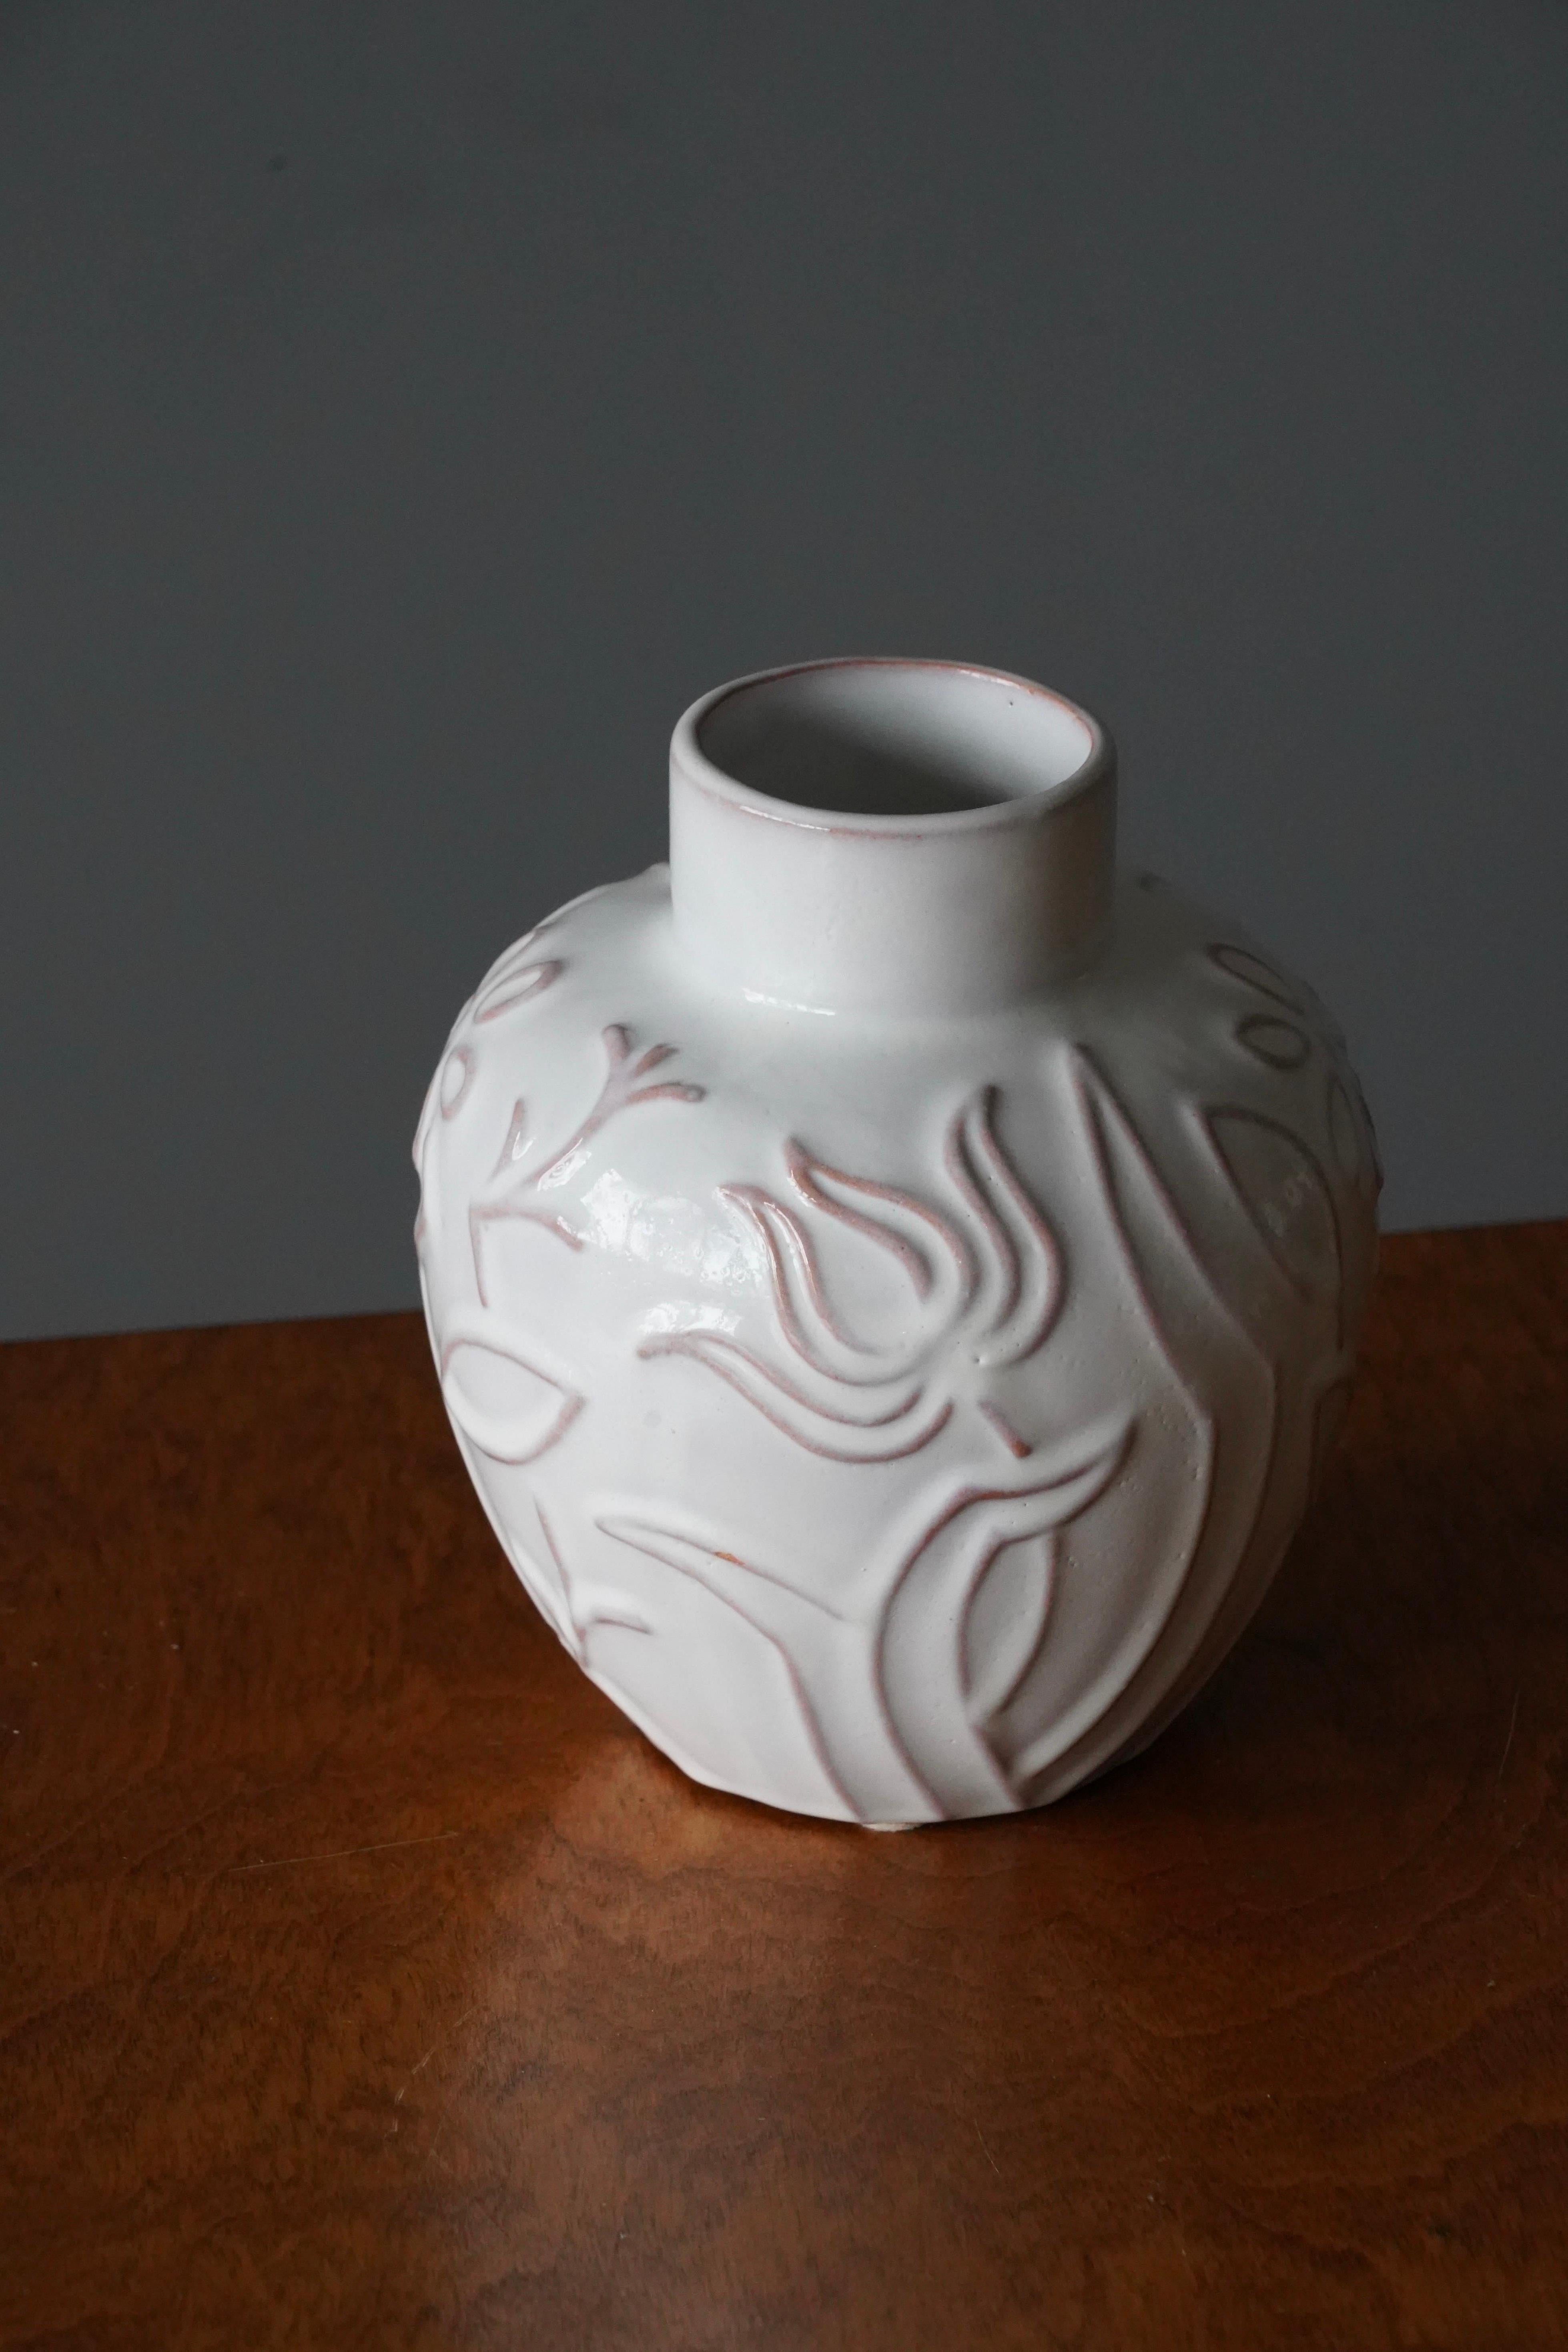 An early modernist vase. Produced by Upsala-Ekeby, Sweden, 1940s. Designed by Harald Östergren (1888-1974). Features white cream glaze. Earthenware.

Other designers of the period include Ettore Sottsass, Carl Harry Stålhane, Lisa Larsson, Axel